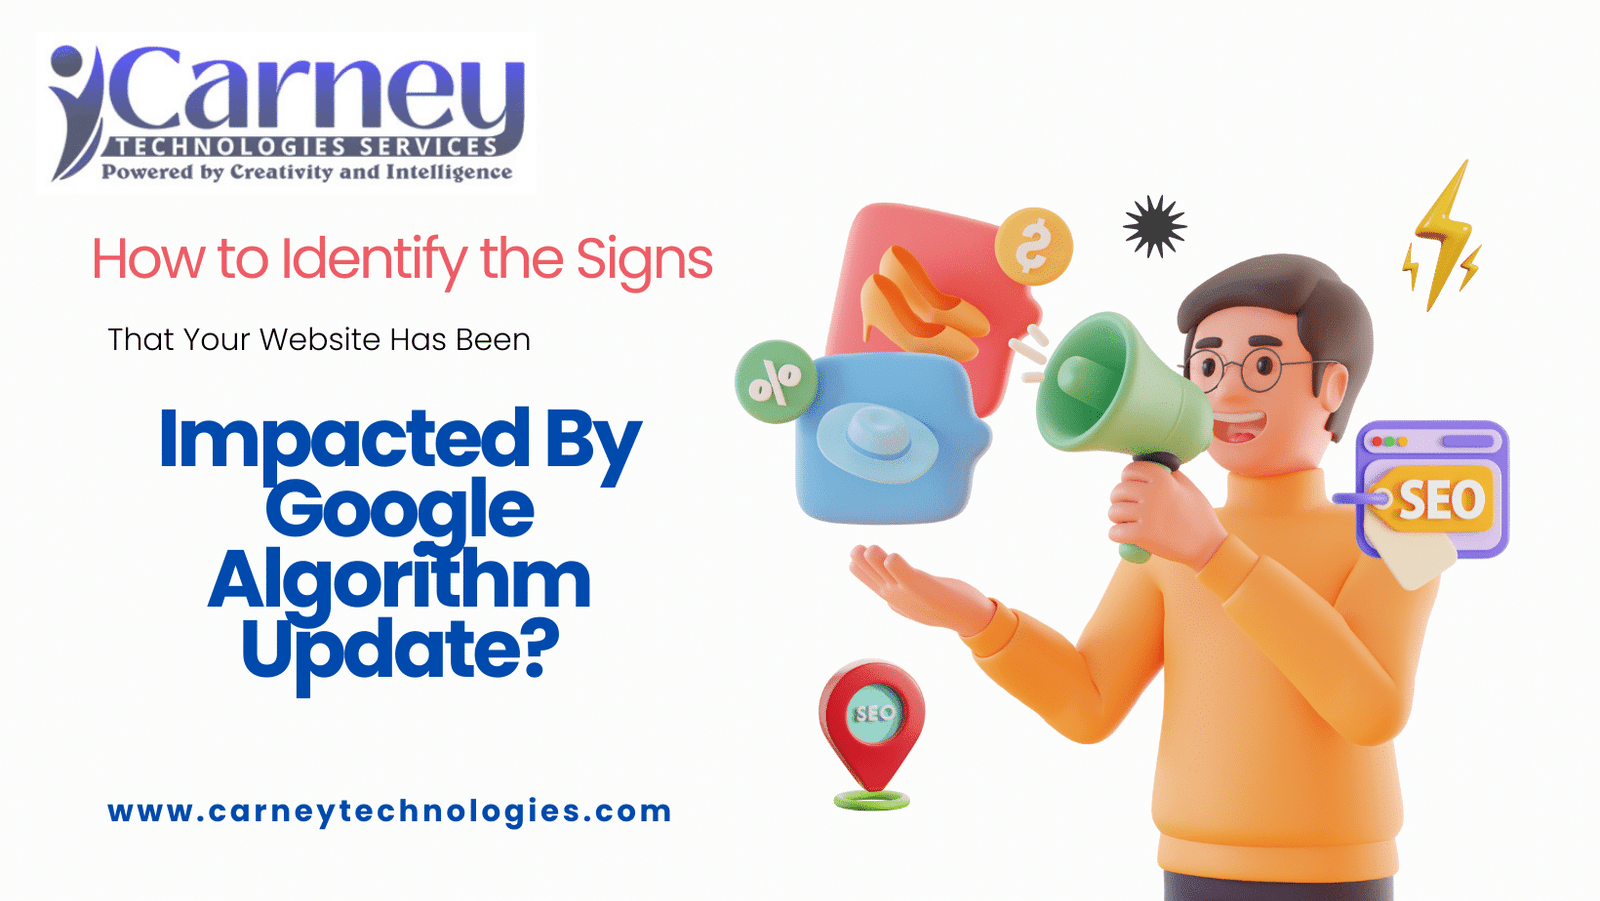 How to Identify the Signs That Your Website Has Been Impacted By Google Algorithm Update?